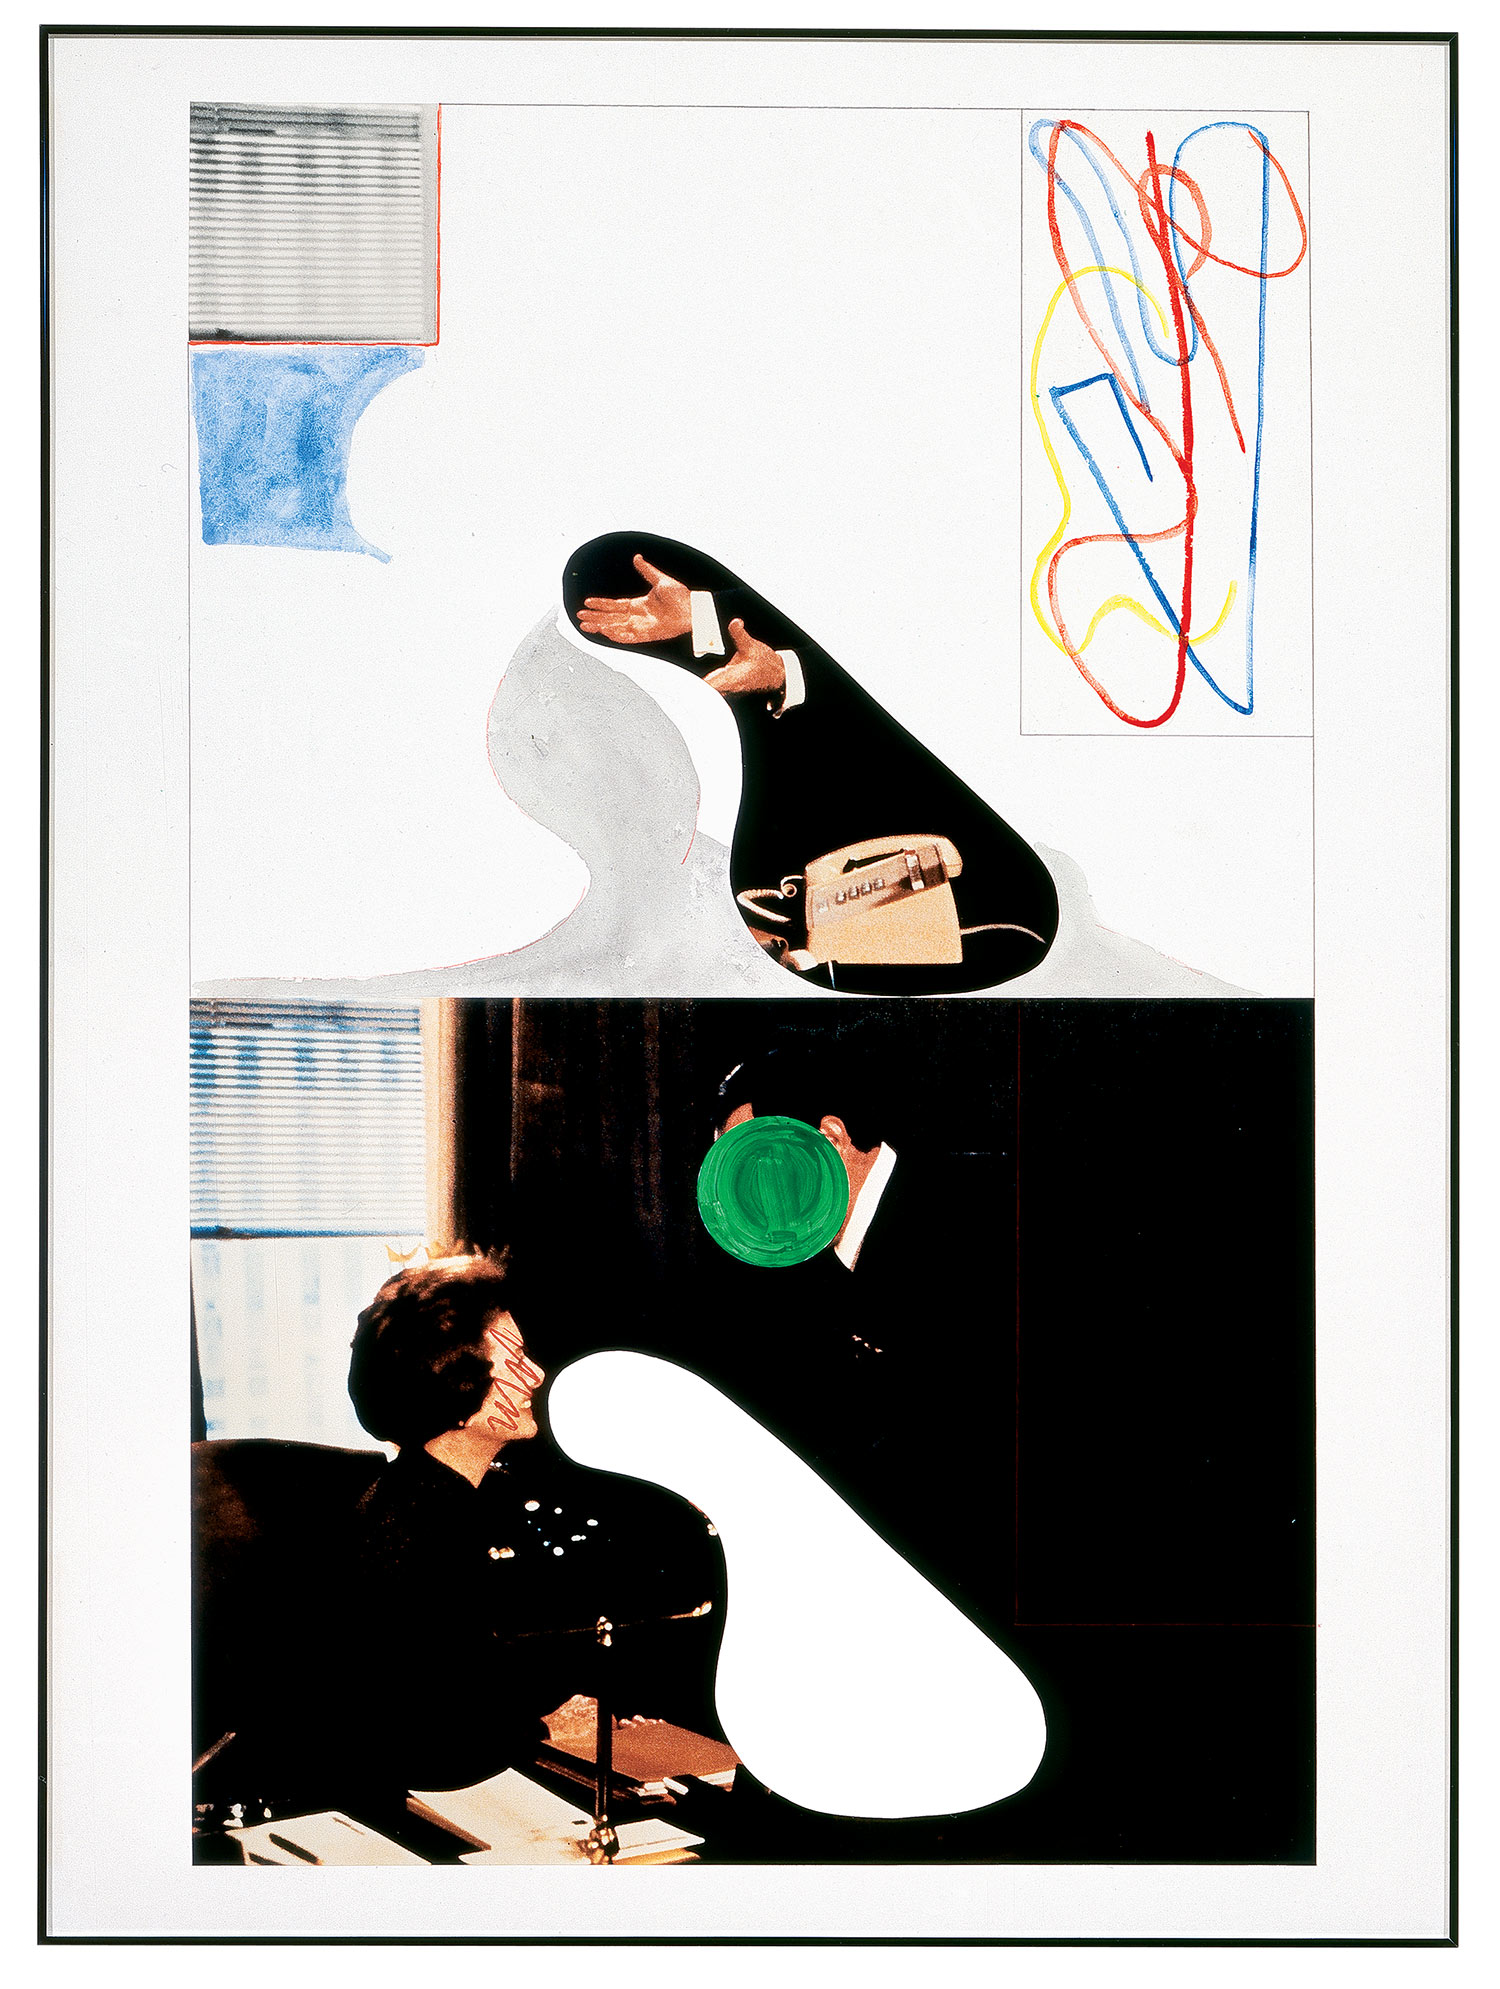   Two Persons, Two Hands, Telephone (with Window),  1995  ©&nbsp;John Baldessari 